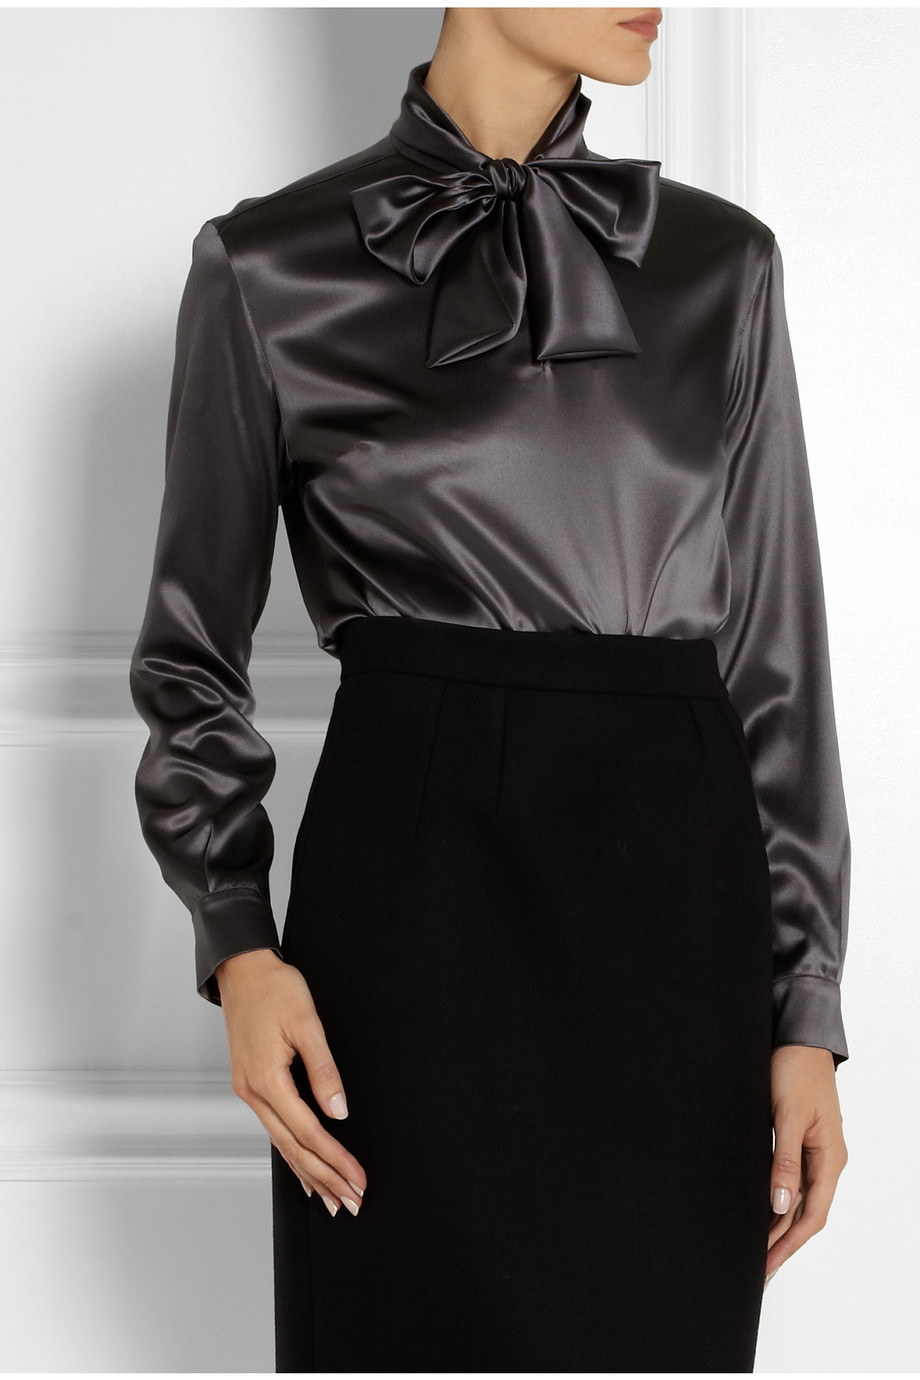 Dolce & Gabbana Pussy-Bow Stretch-Silk Satin Blouse in Gray - Lyst